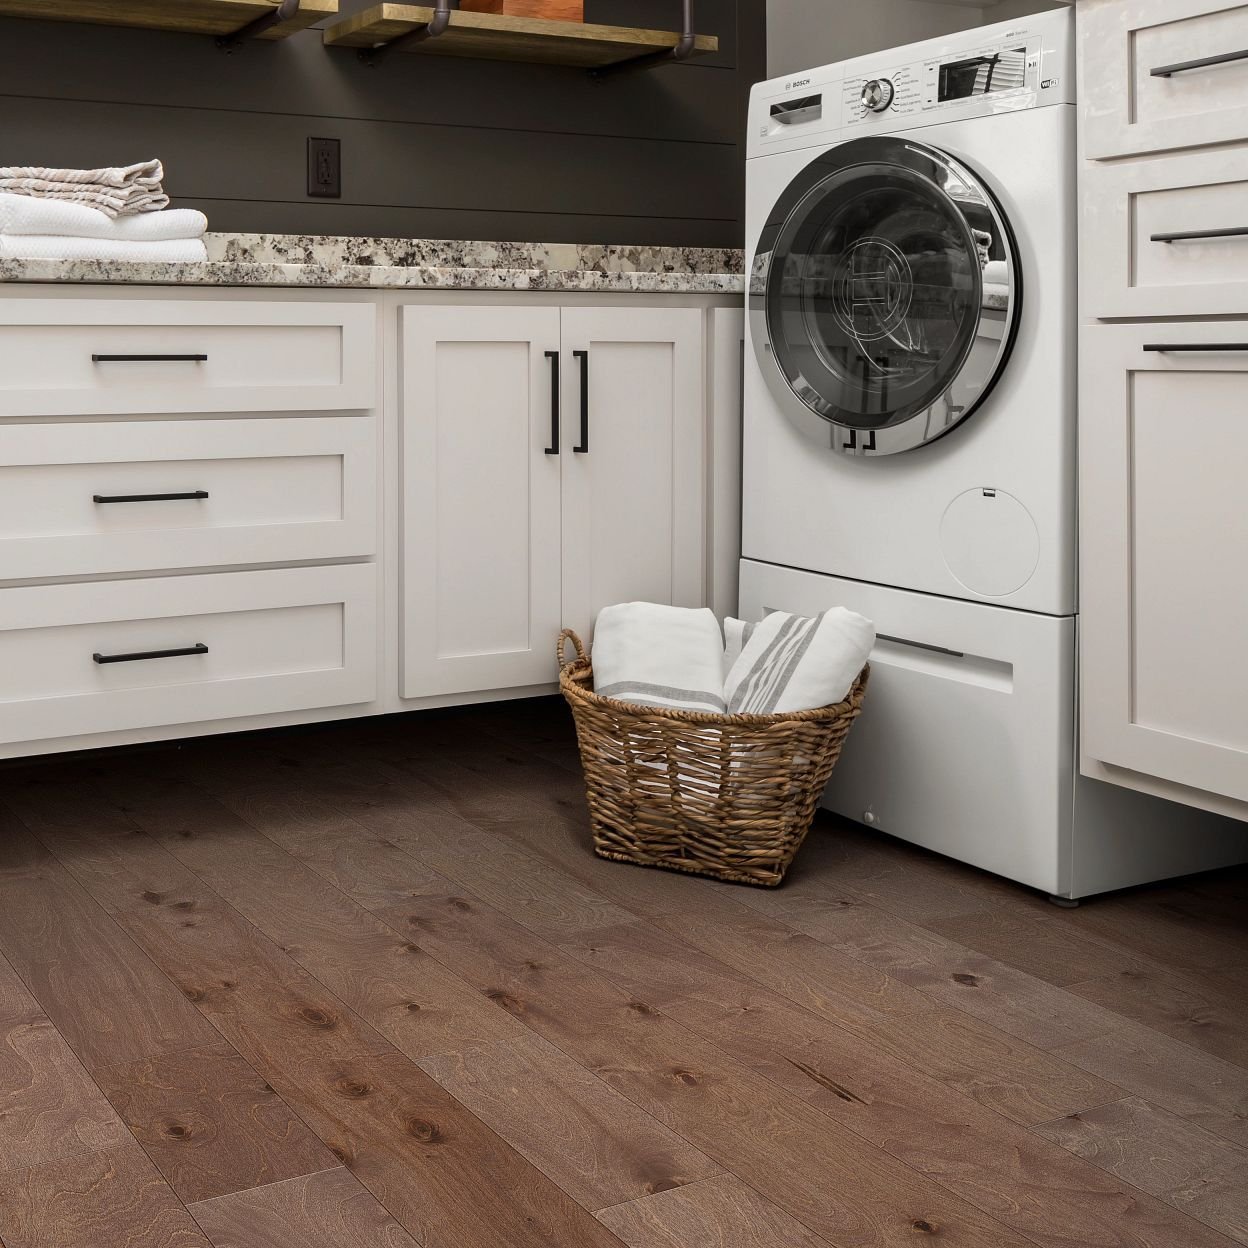 white bathroom cabinets on a brown hardwood floor from The Carpet Shop - Inspired Floors for Less in Benton Harbor, MI